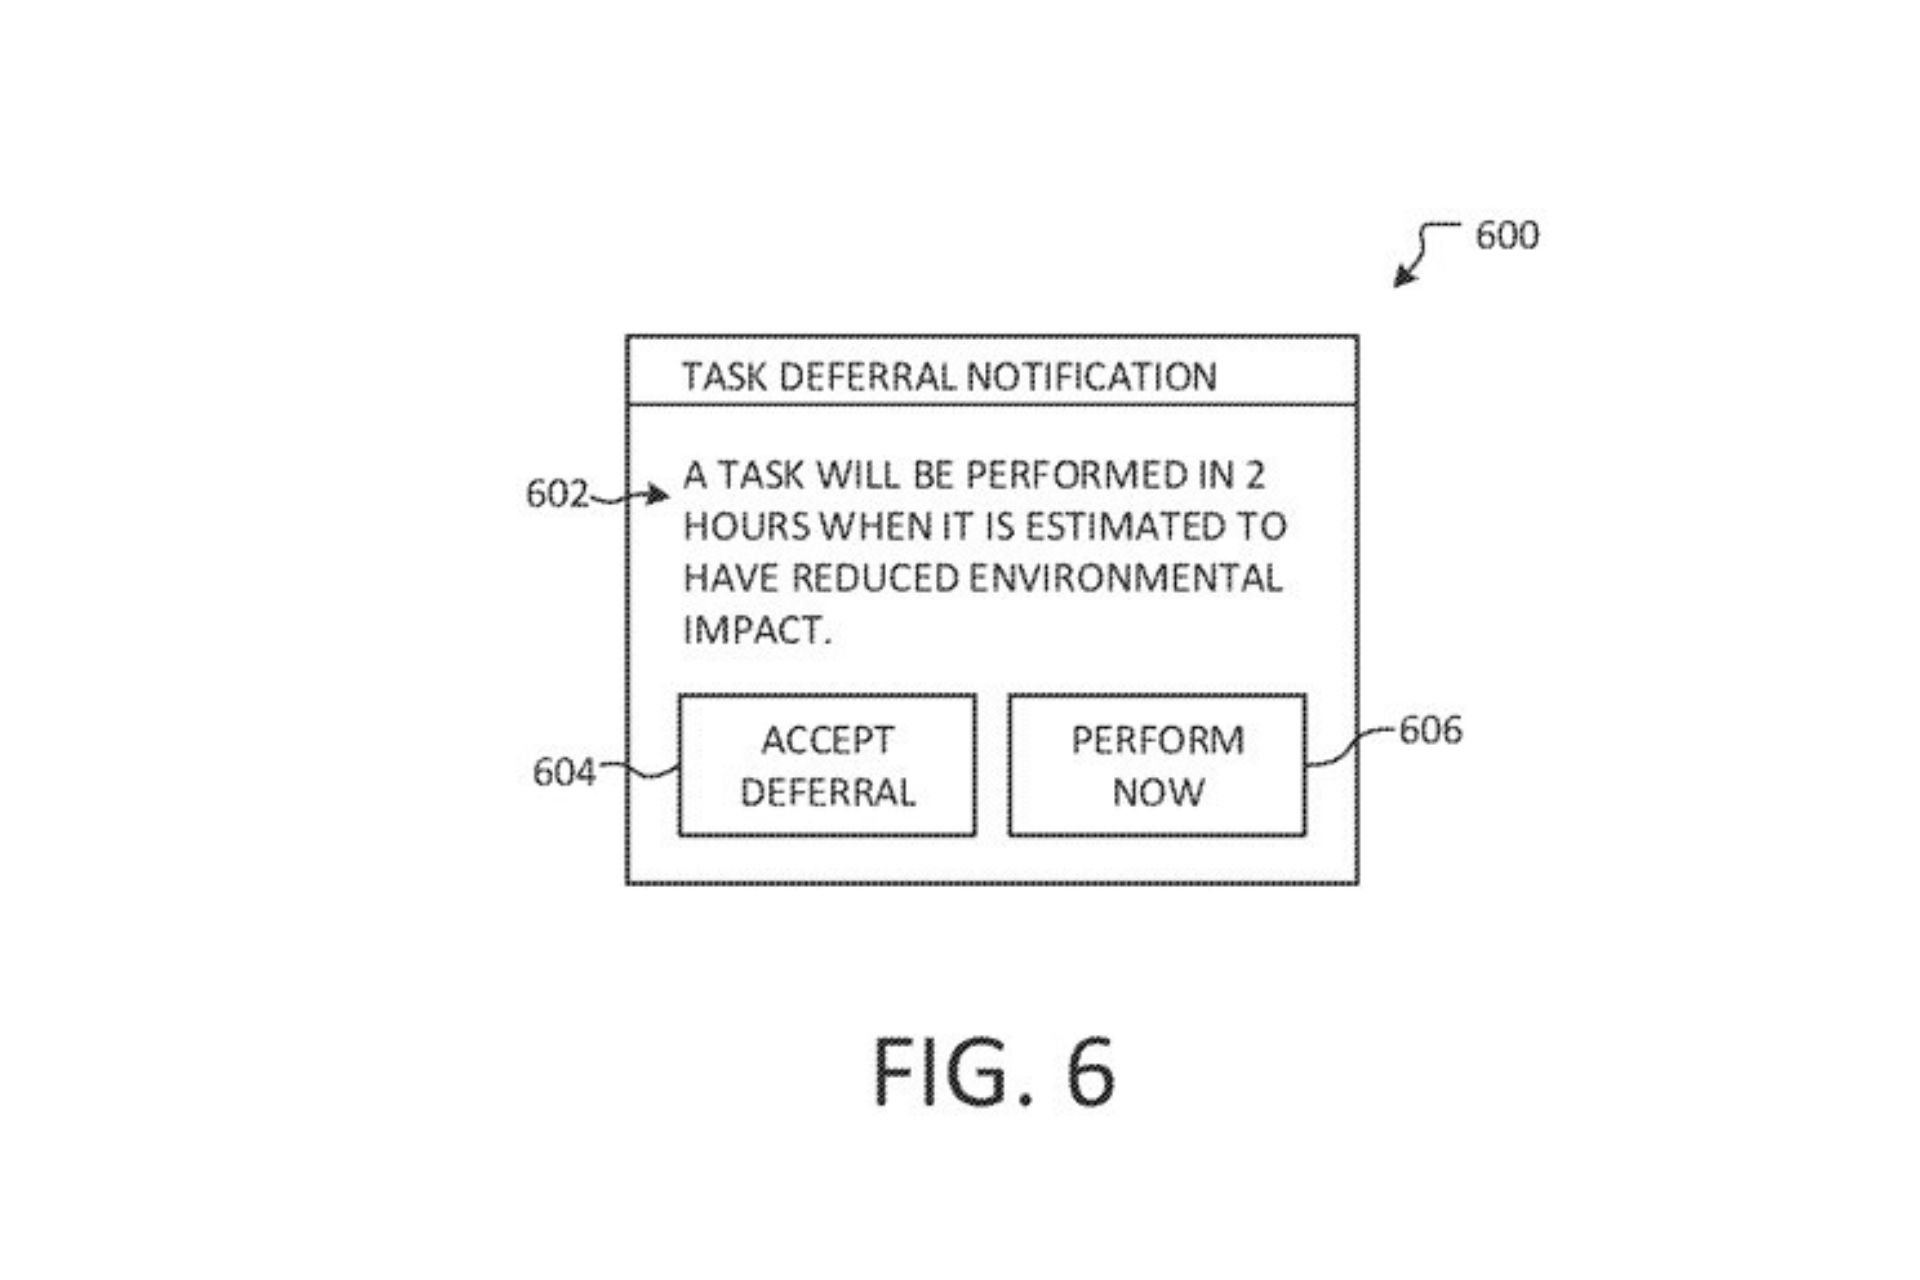 Microsoft’s latest patent describes a sustainable computing technology that can be integrated with Windows